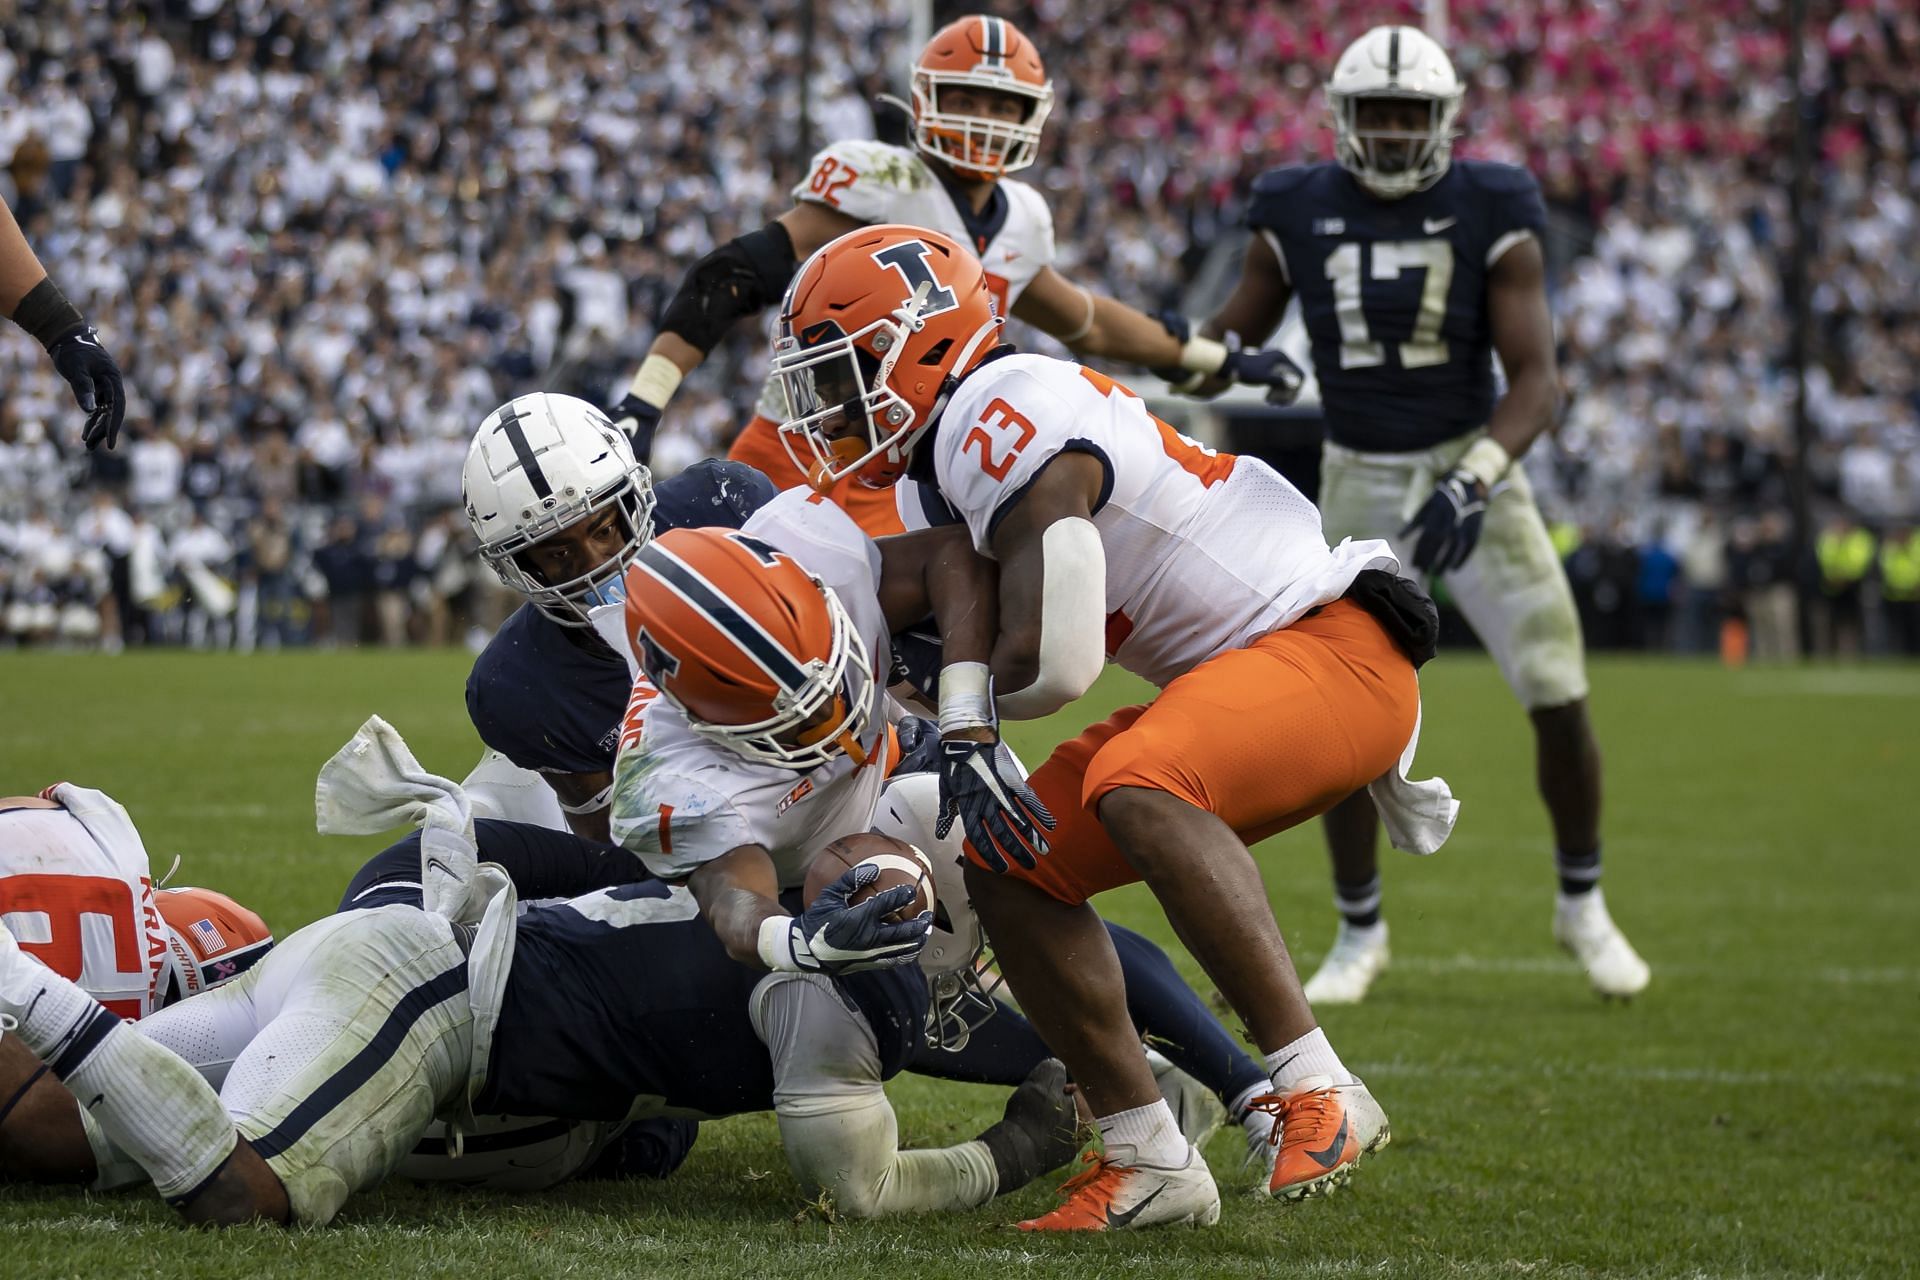 Isaiah Williams, #1 of the Illinois Fighting Illini, scores a two-point conversion